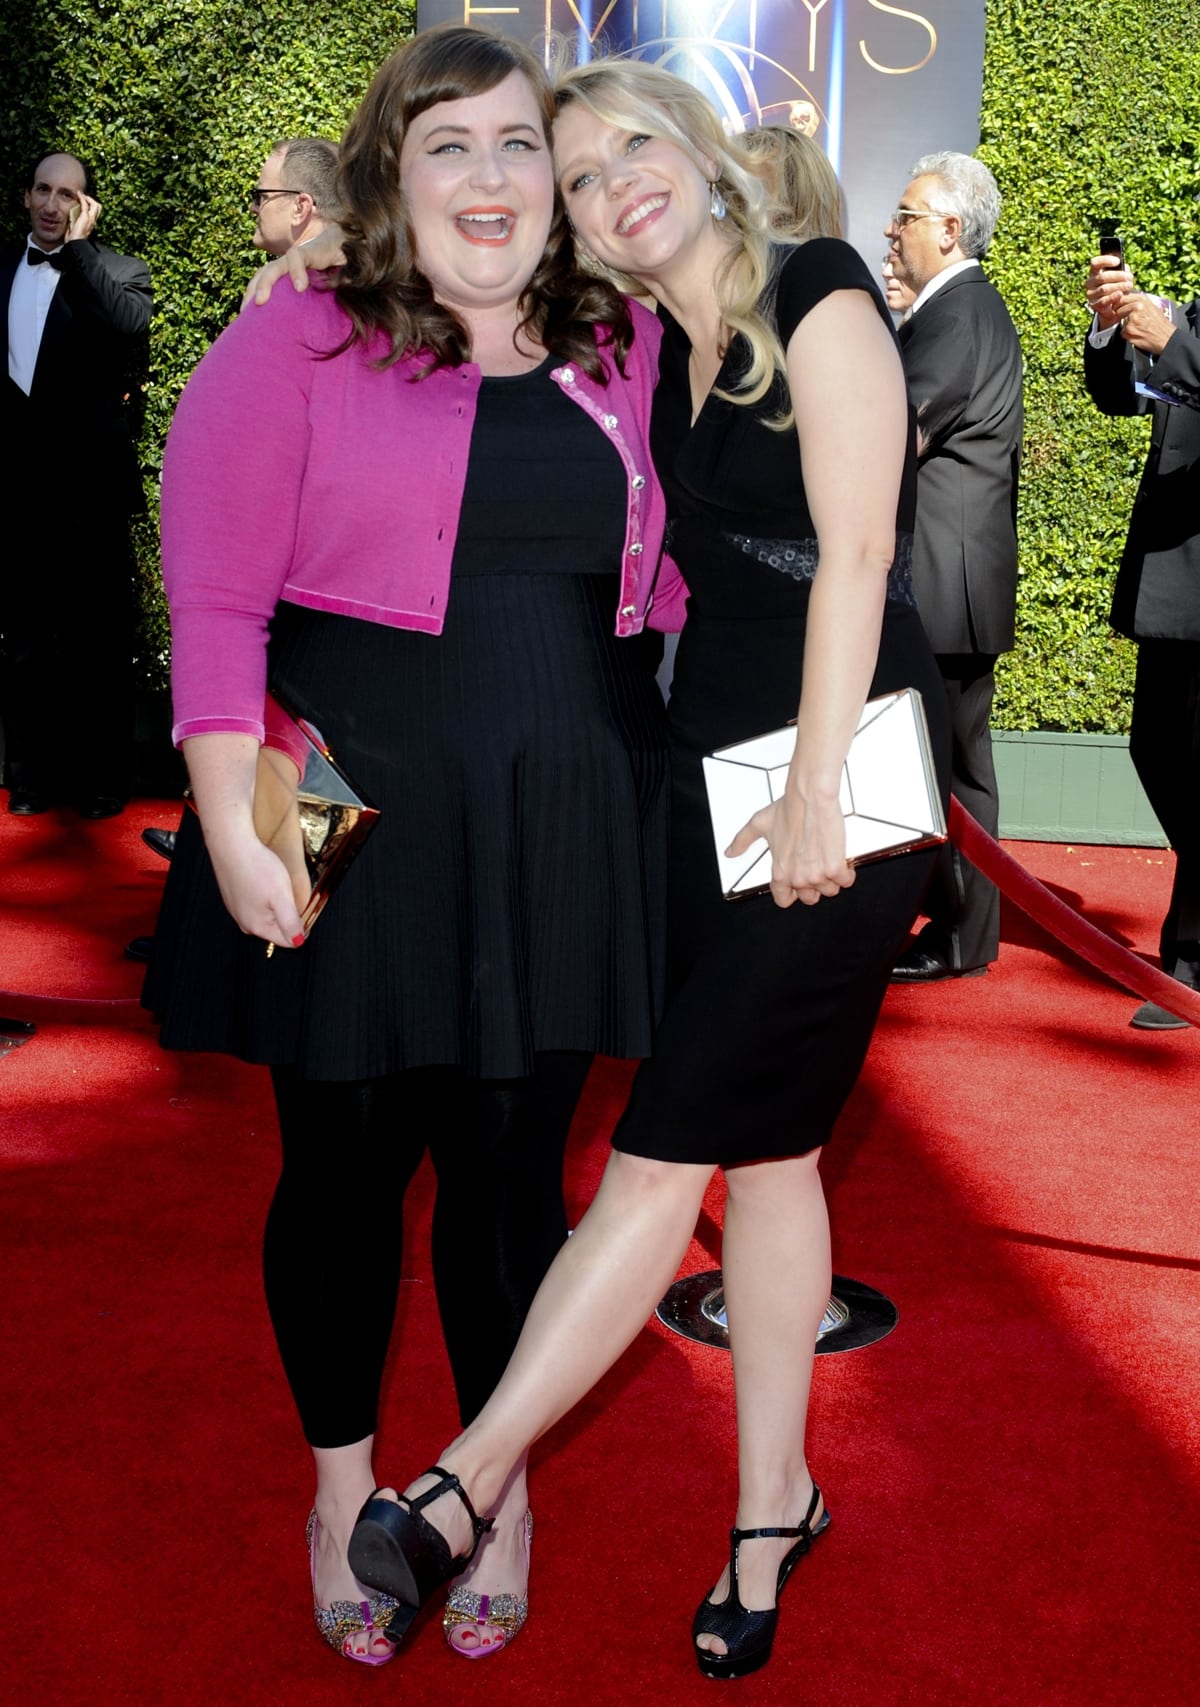 SNL veterans Aidy Bryant (L) and Kate McKinnon attend the 2014 Creative Arts Emmy Awards